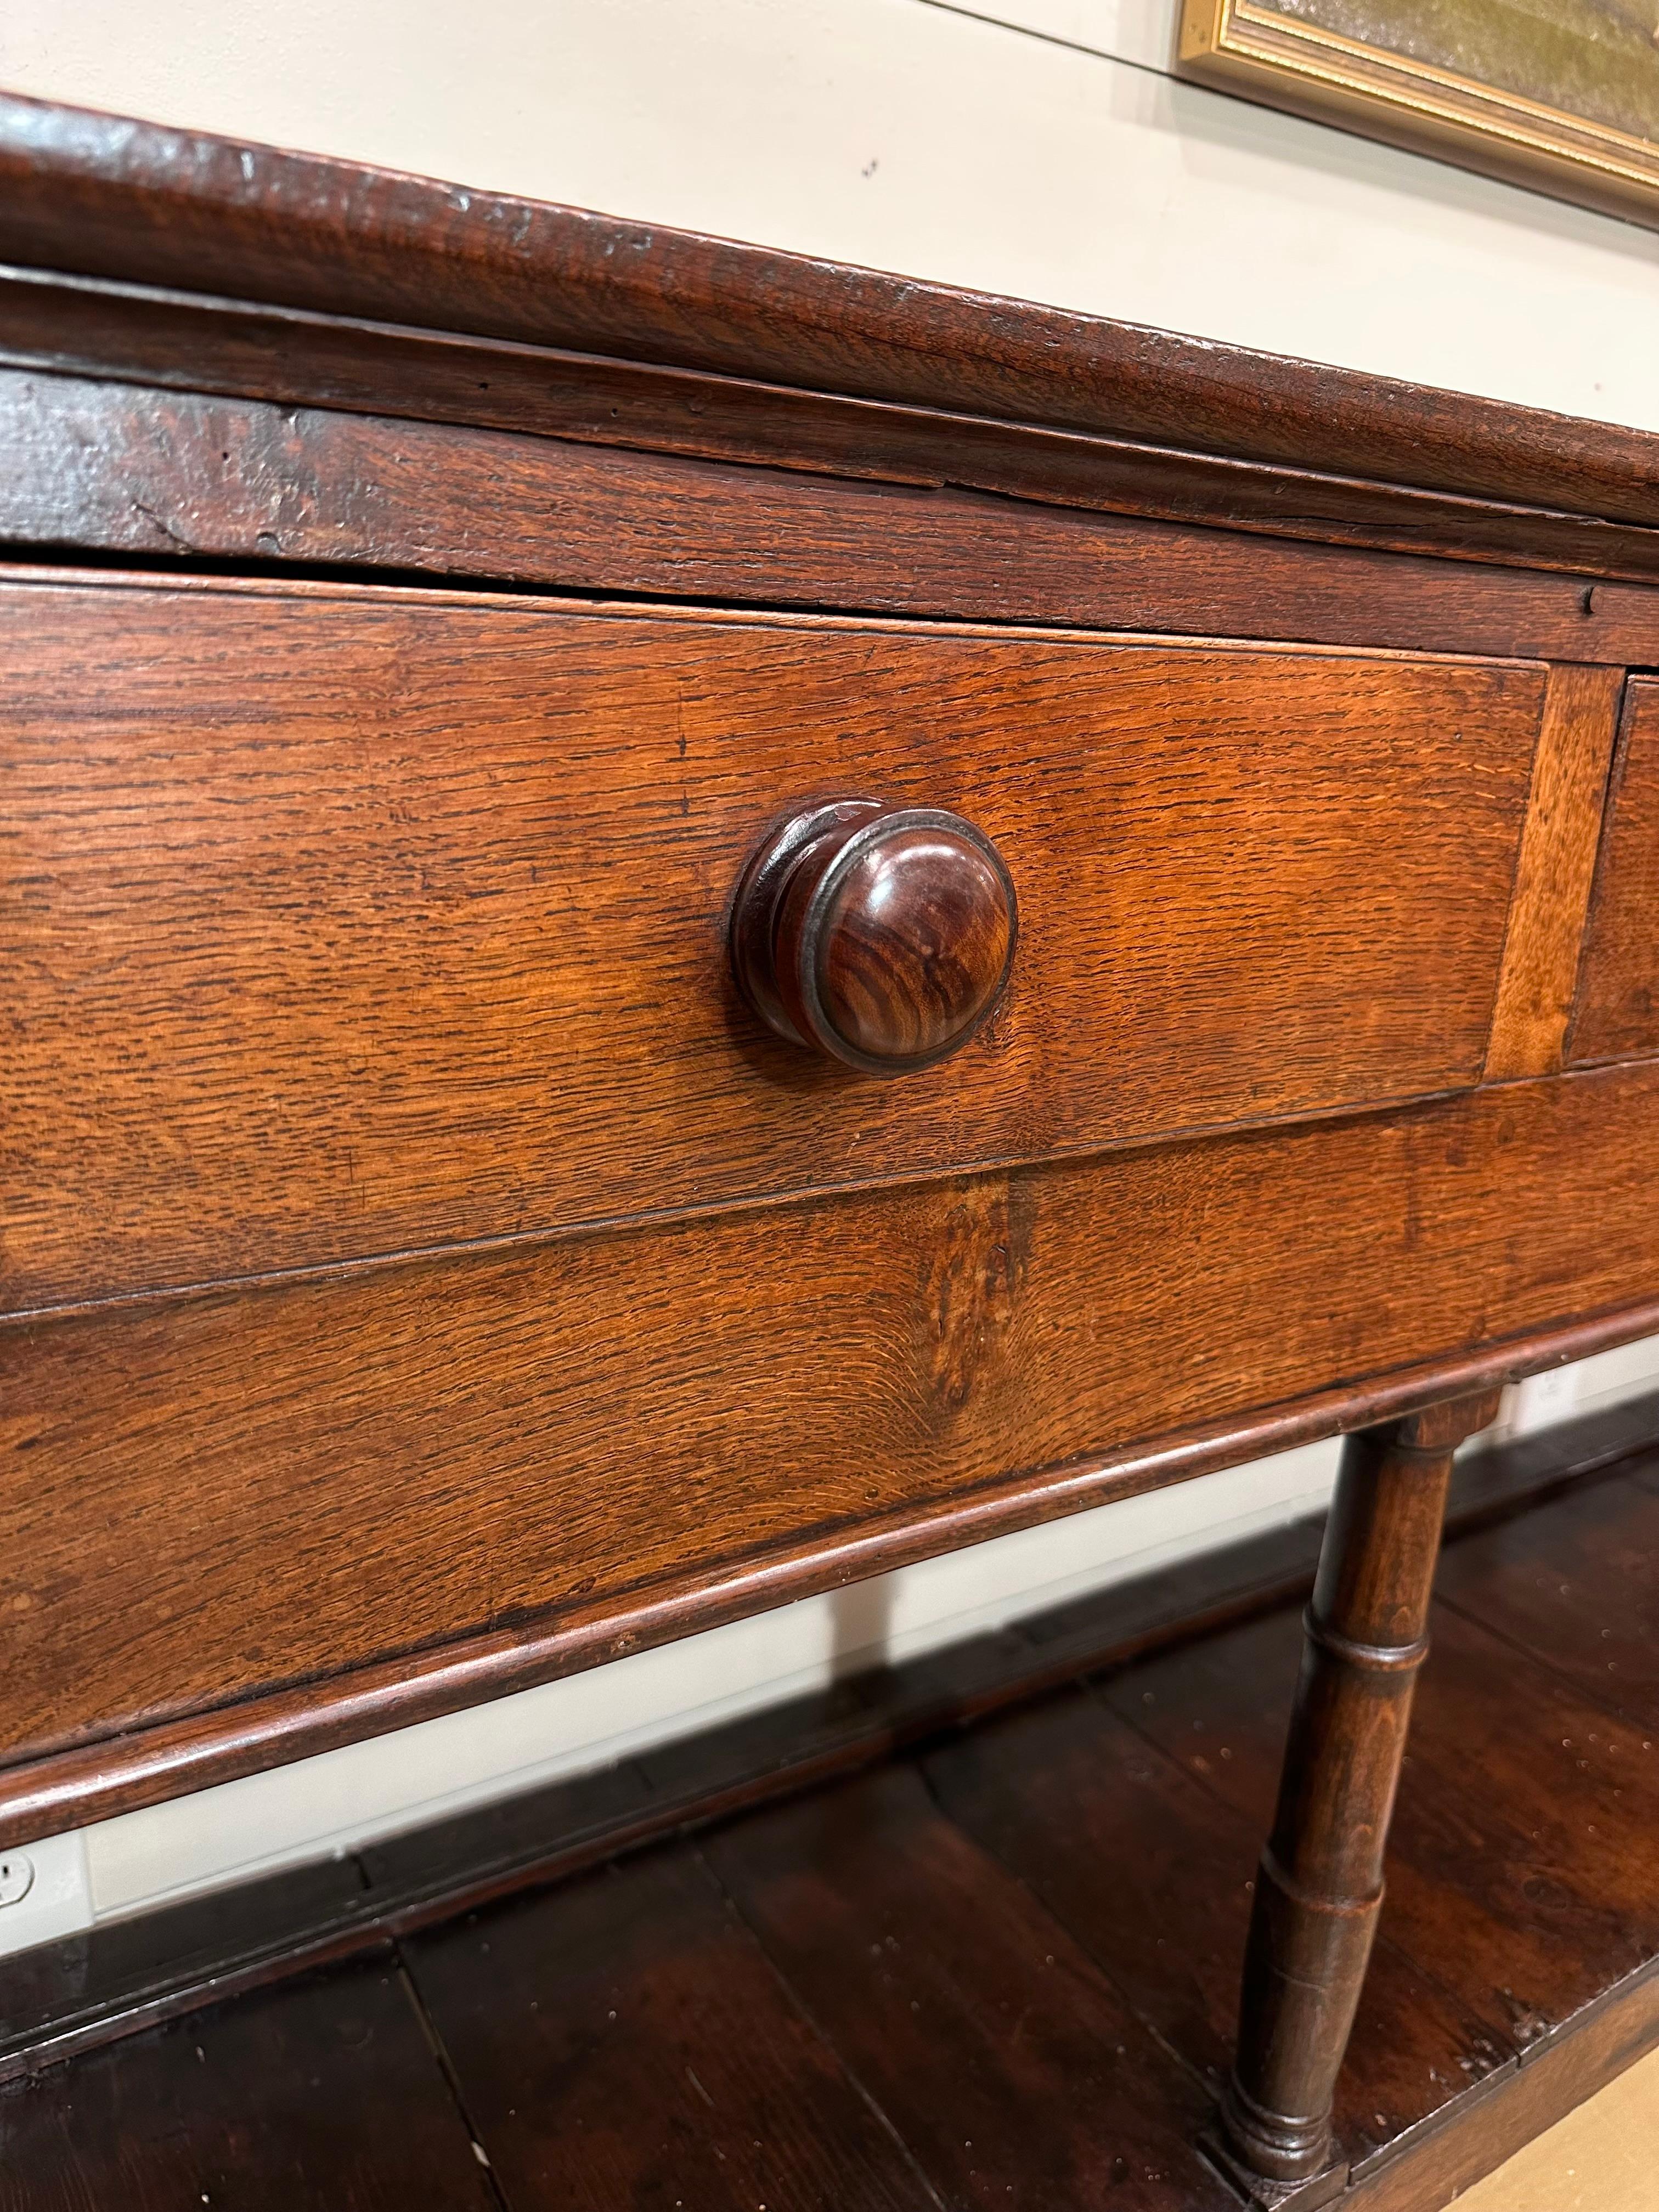 Own a piece of history with this 18th Century English Welsh Dresser Base. Crafted with timeless charm, this antique dresser exudes rustic simplicity. The sturdy wooden construction and warm patina tell a story of centuries gone by. With its